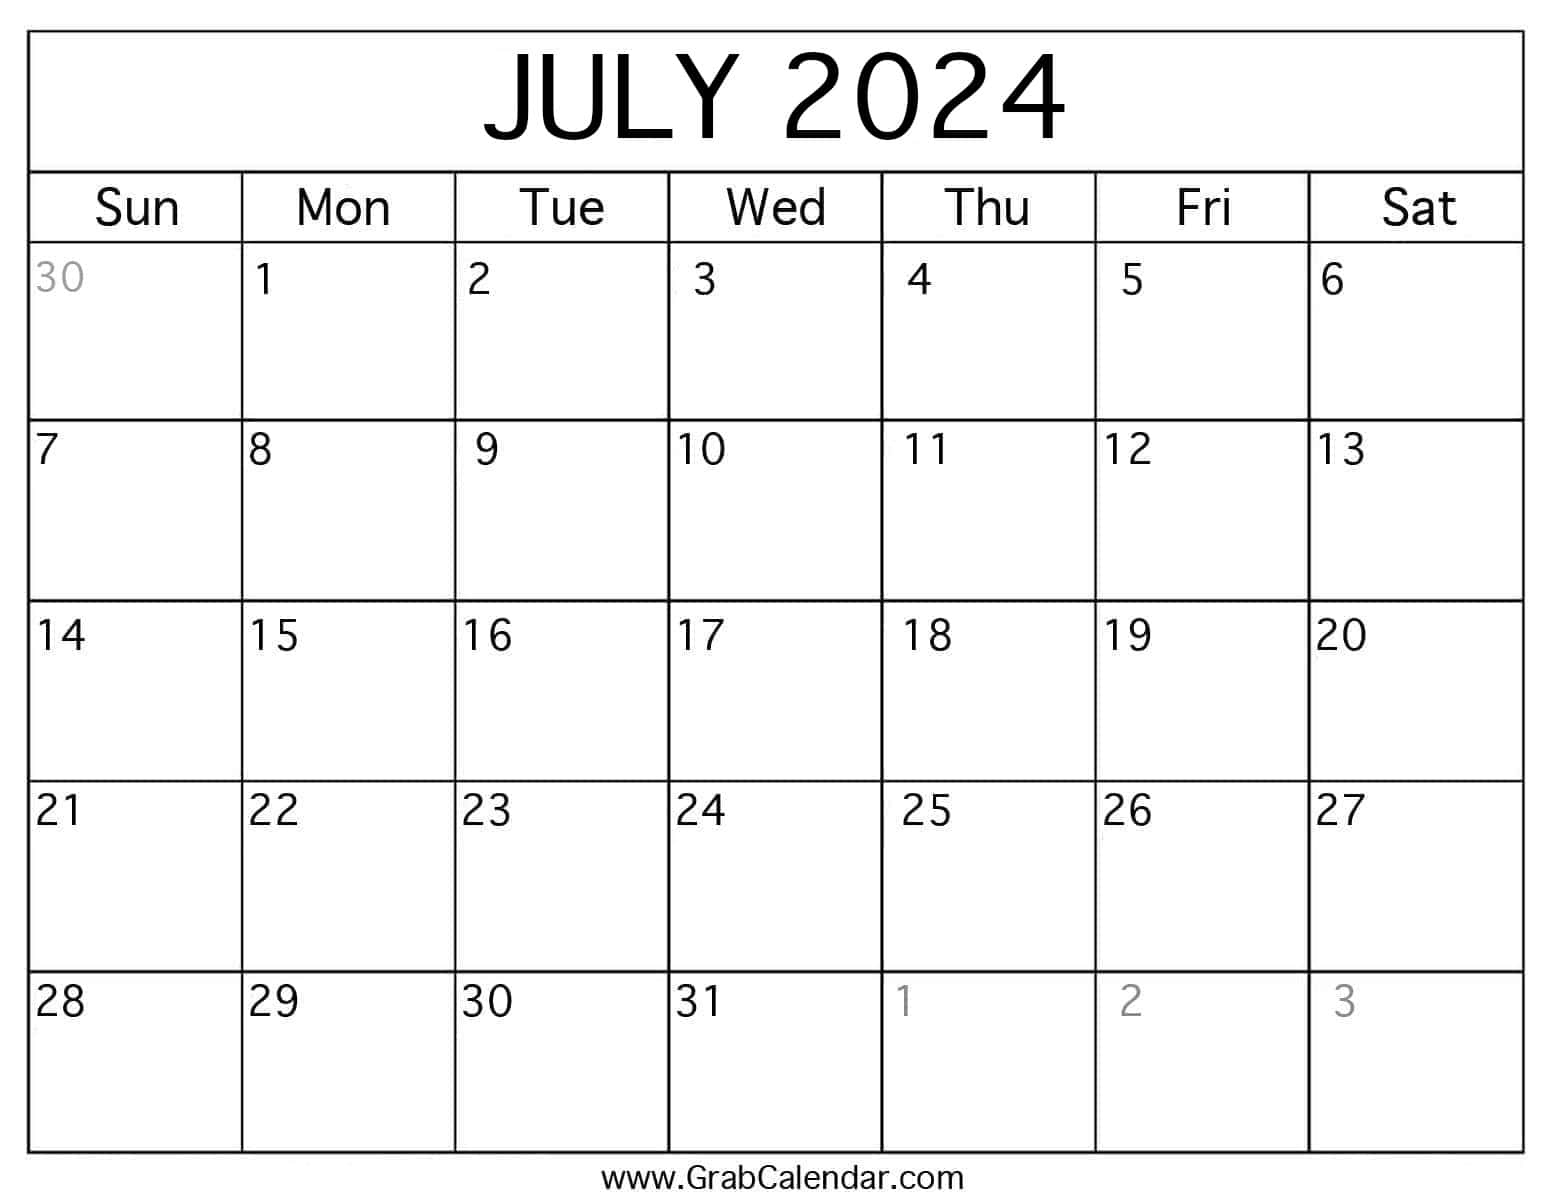 Printable July 2024 Calendar | Show Me The Calendar Of The Month Of July 2024